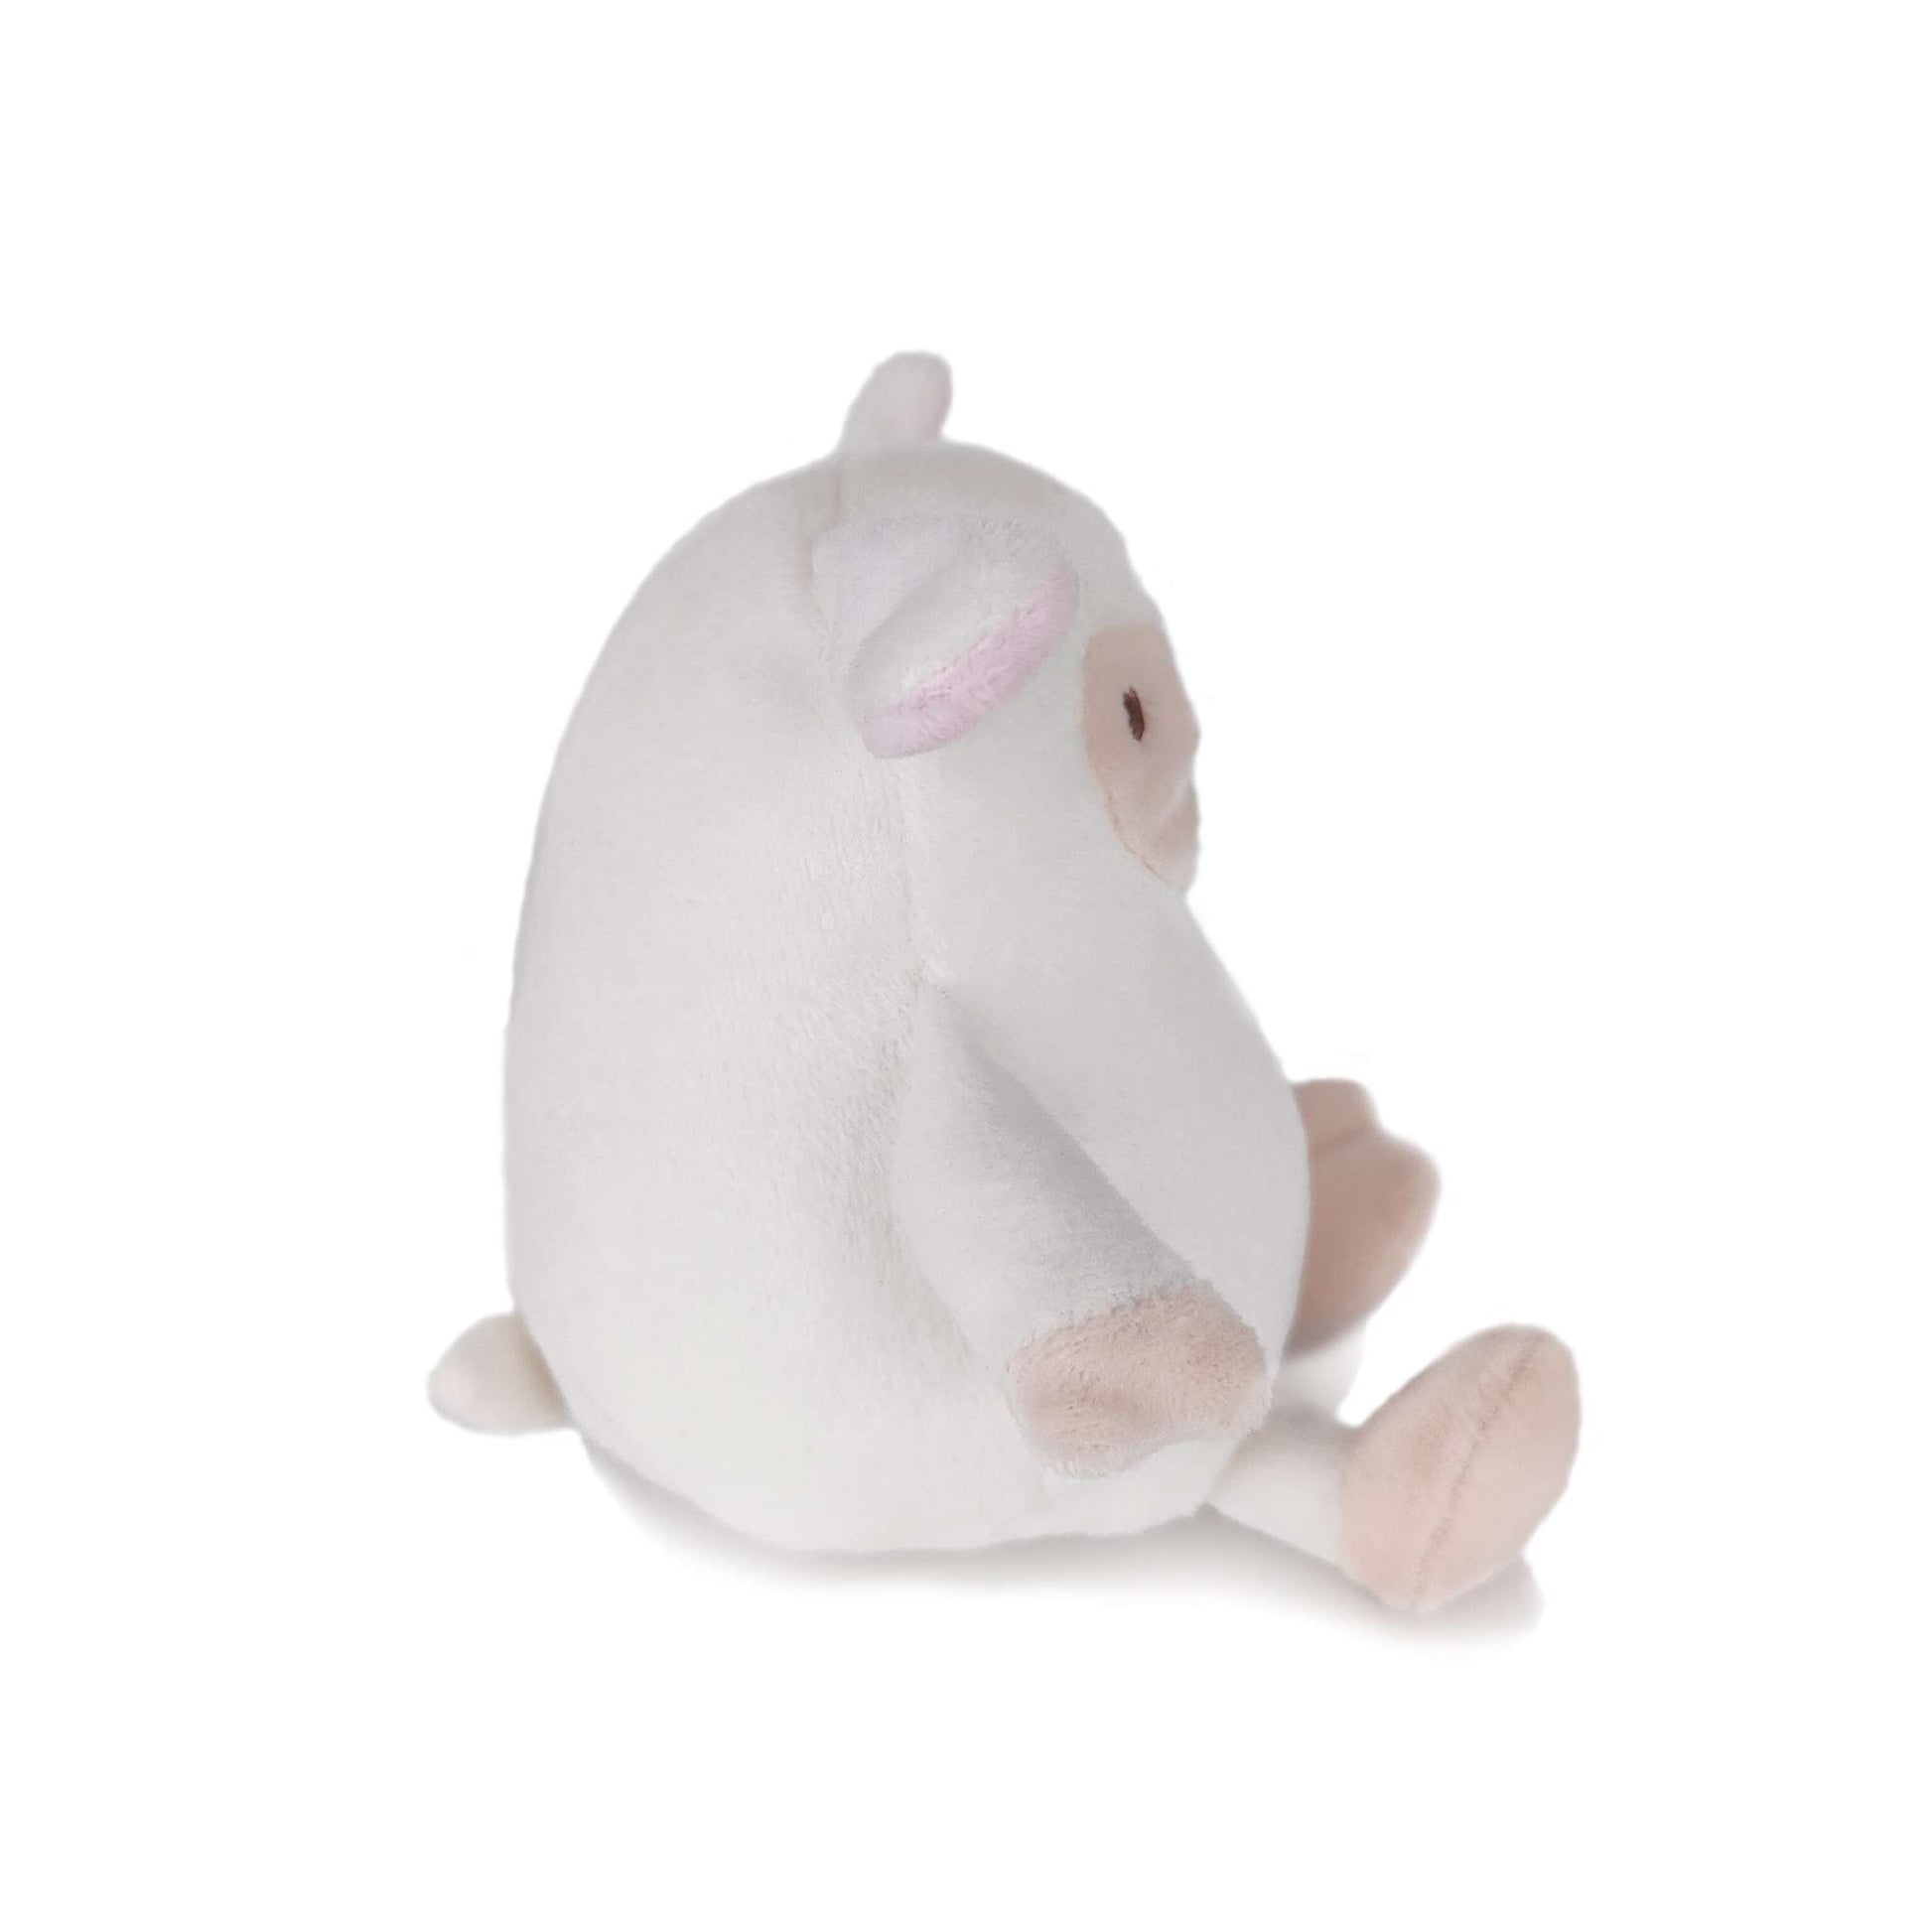 White cartoon toy sheep side view